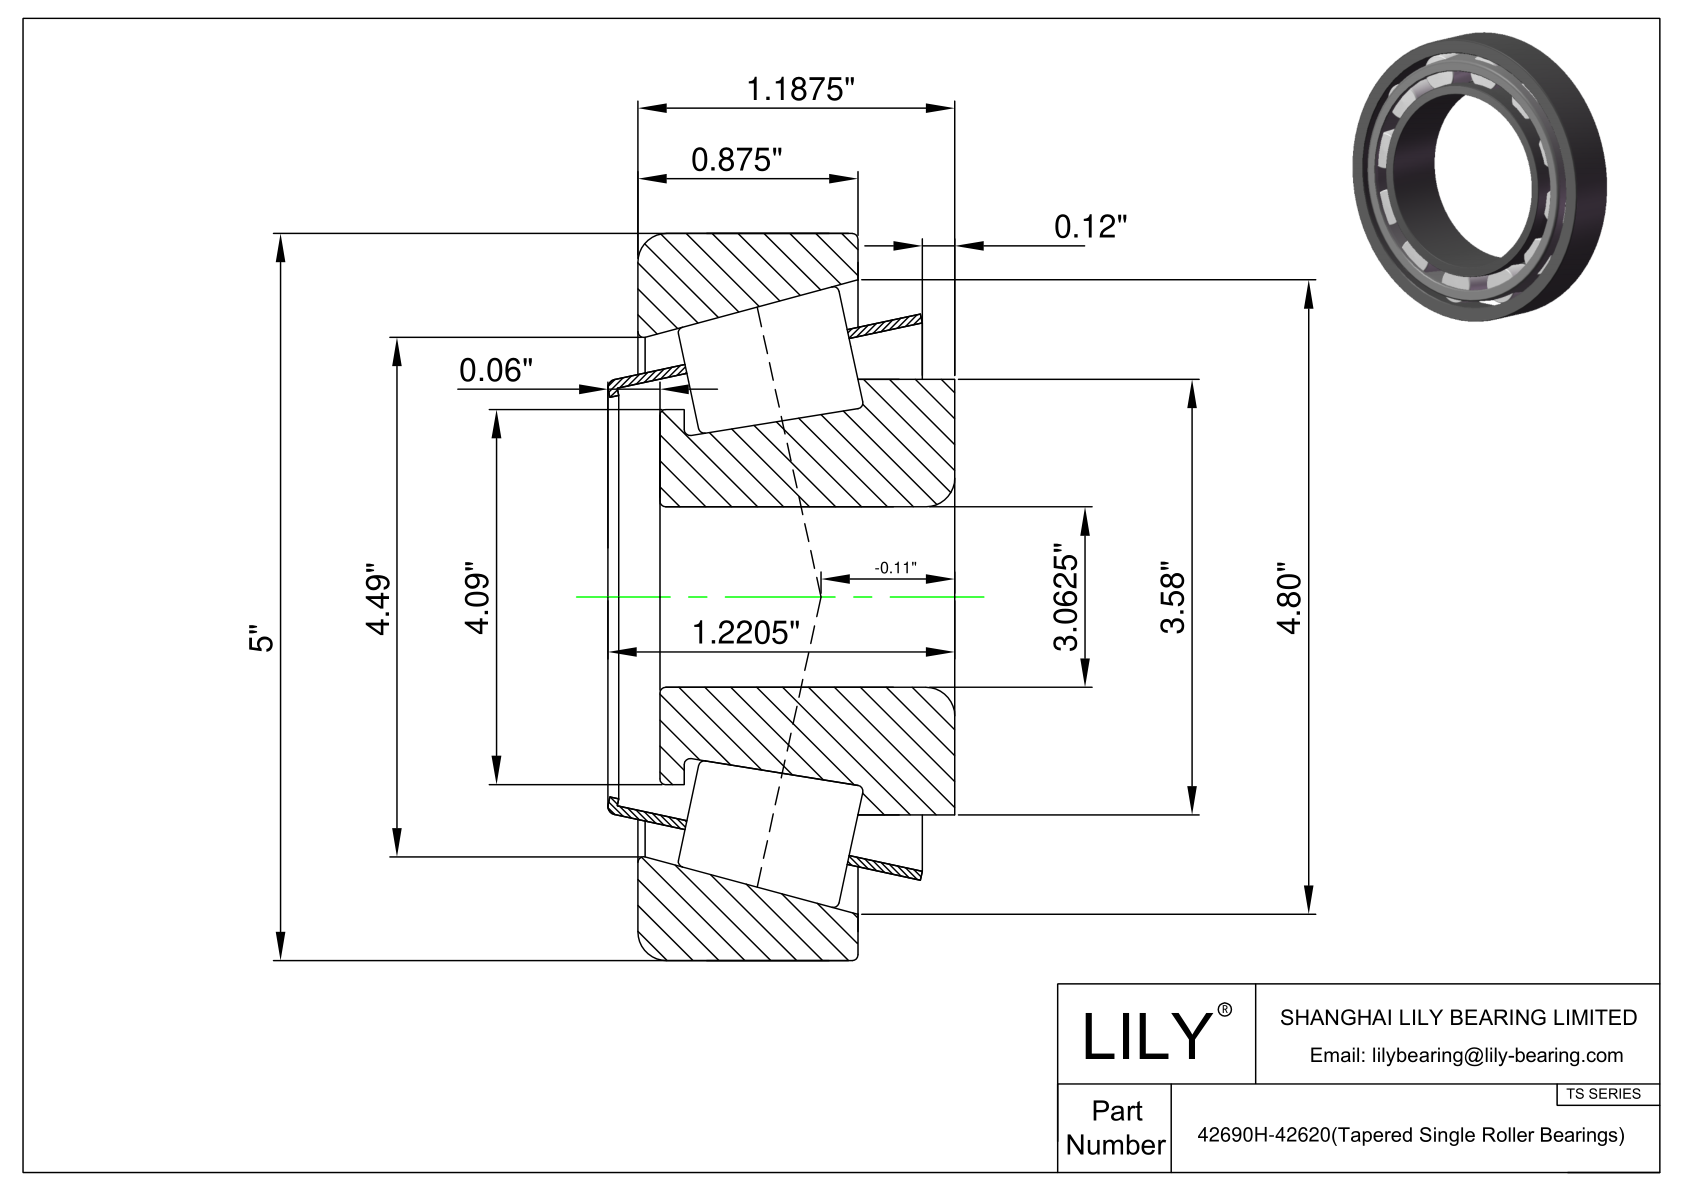 42690H-42620 TS (Tapered Single Roller Bearings) (Imperial) cad drawing